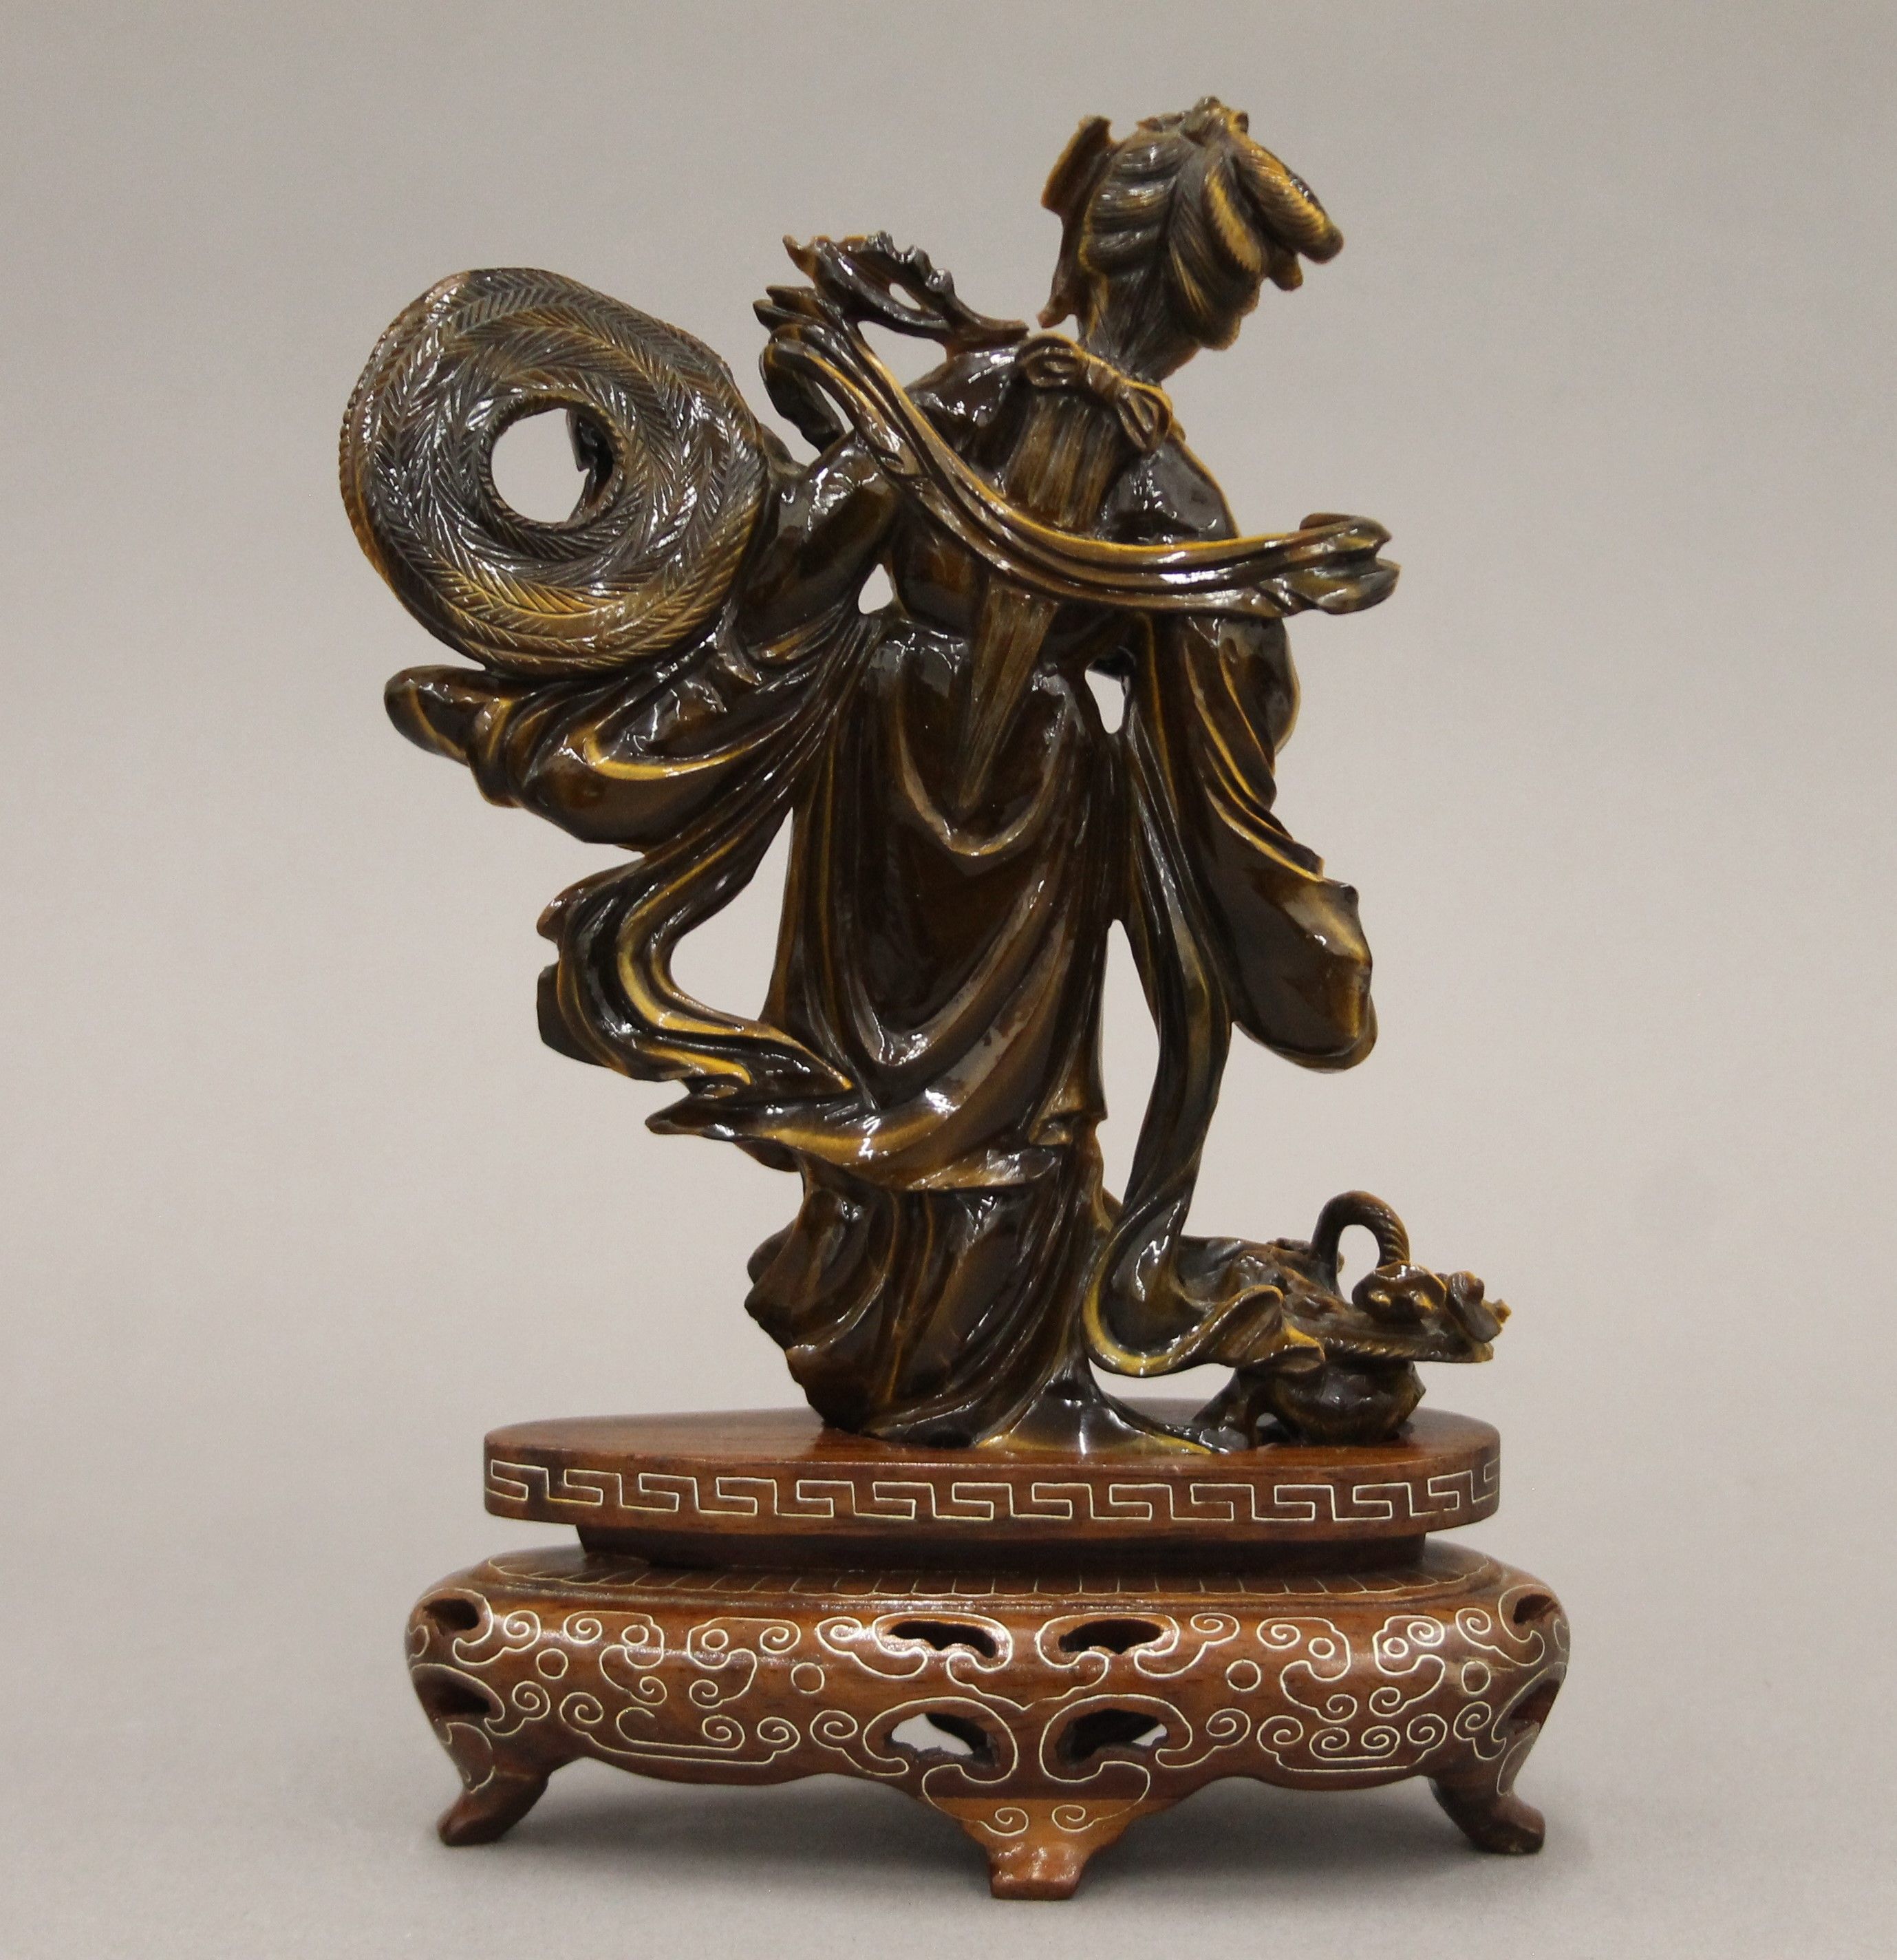 A Chinese tiger's eye hardstone carving of a maiden on a carved wood base. 18.5 cm high. - Image 4 of 5